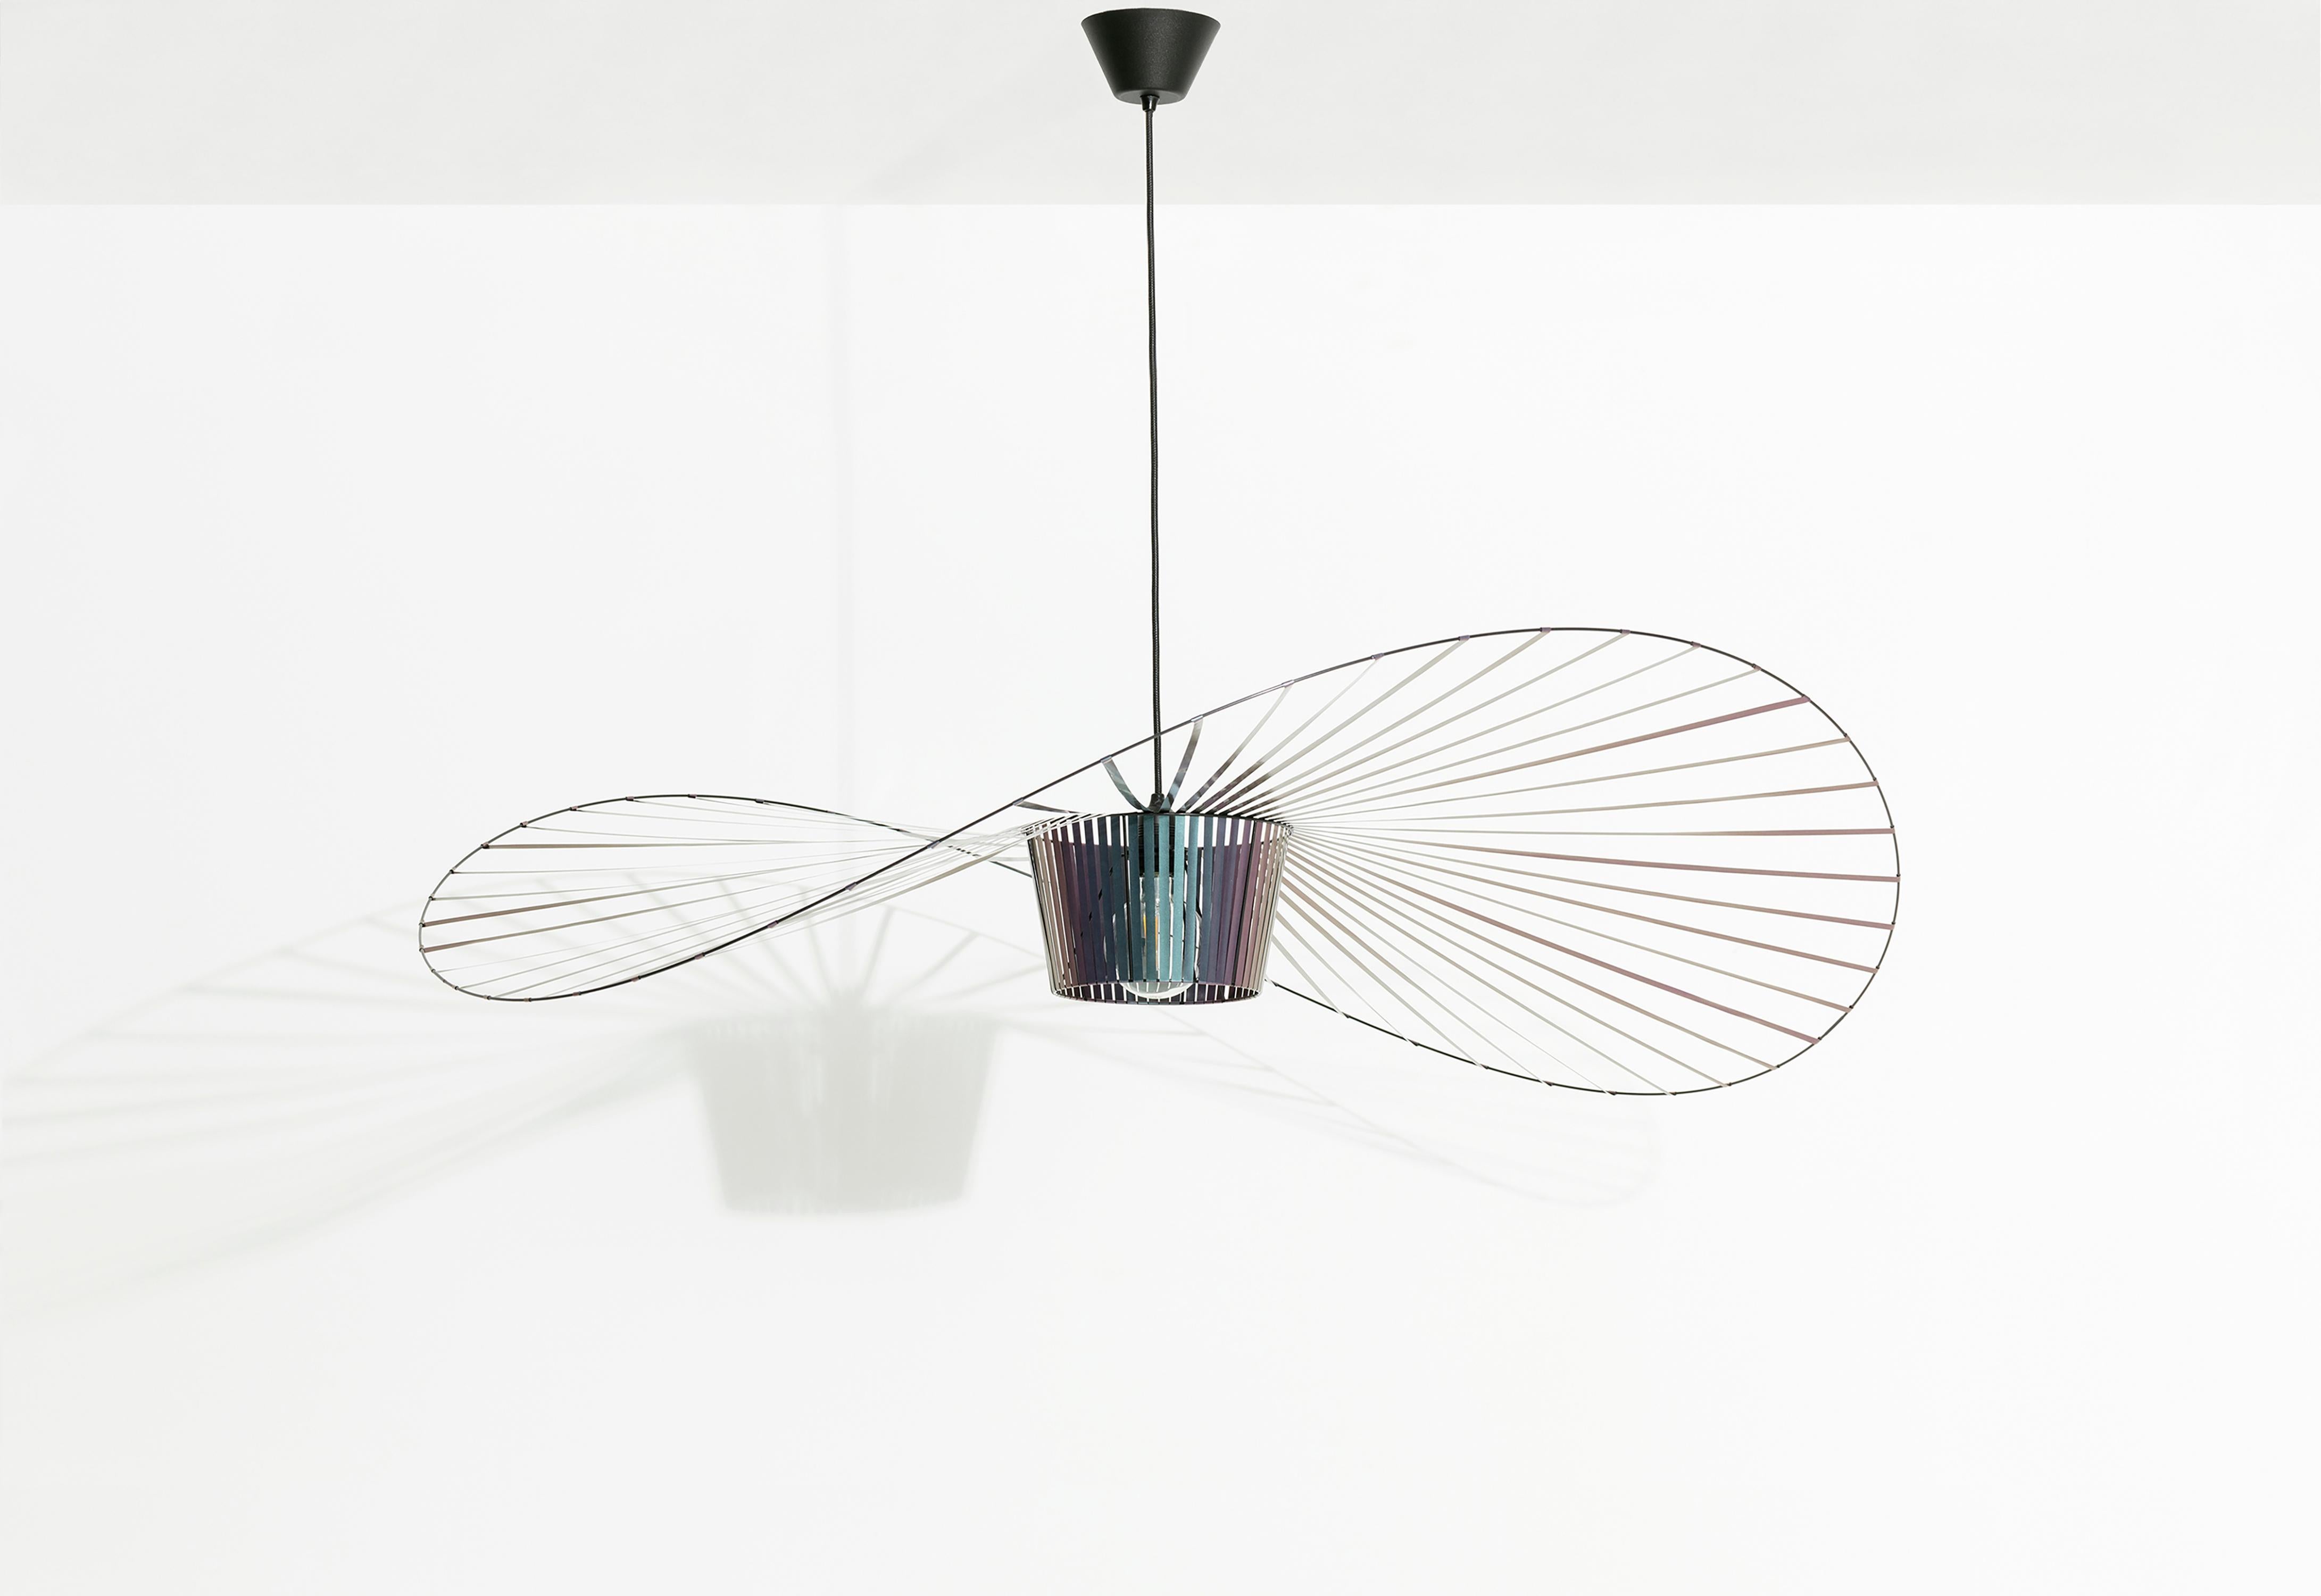 Petite Friture Medium Vertigo Pendant Light in Beetle by Constance Guisset, 2010 In New Condition For Sale In Brooklyn, NY